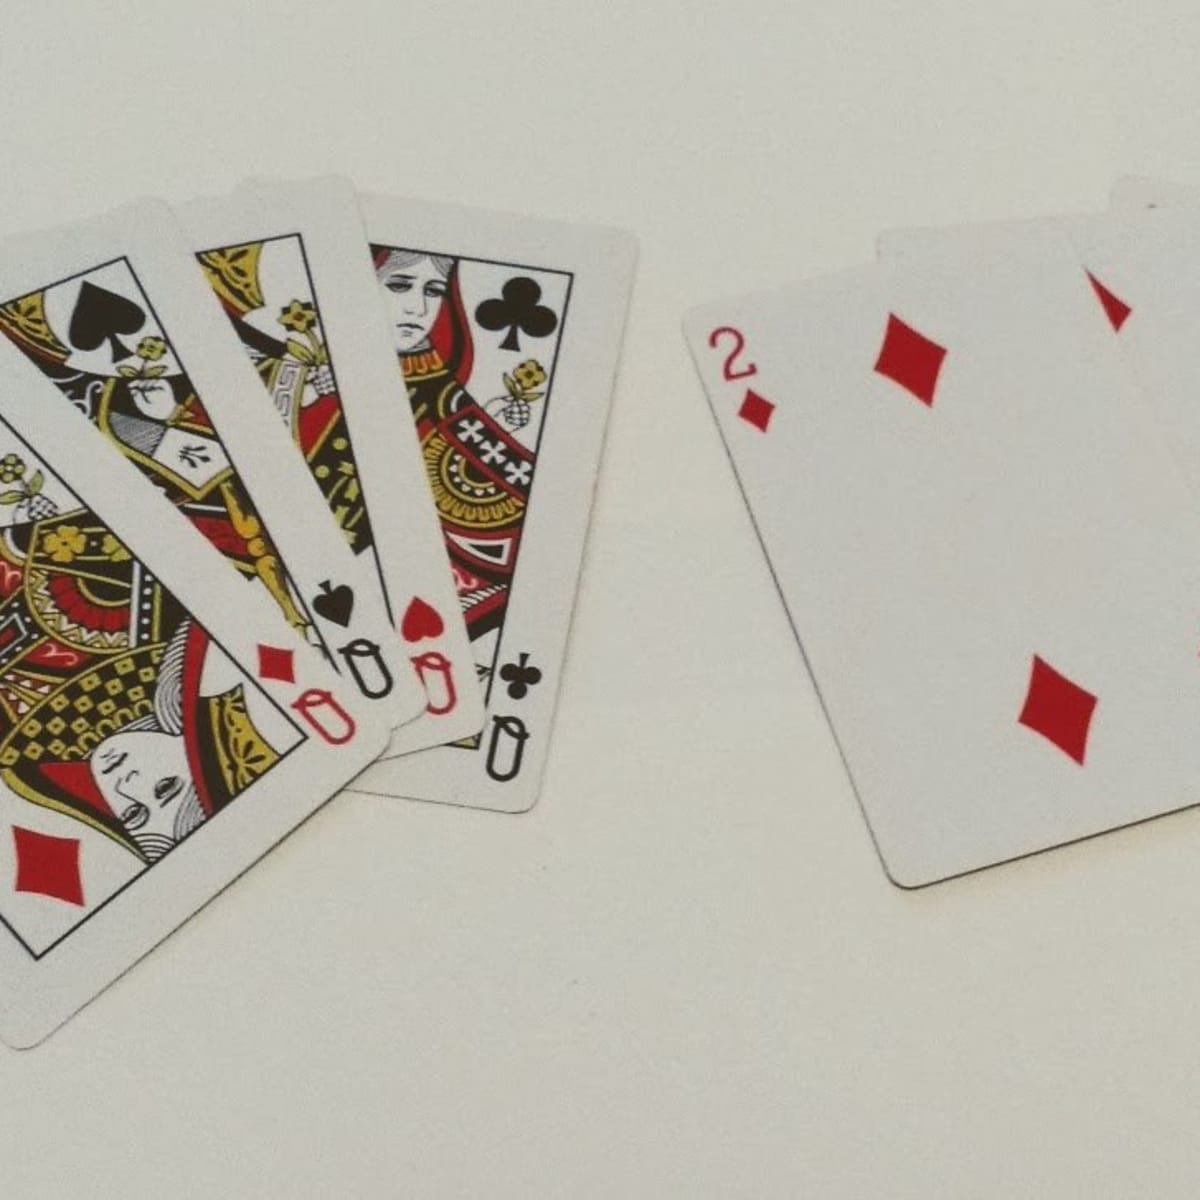 How To Play Easy 7 Card Rummy For Beginners And Some Variations Hobbylark